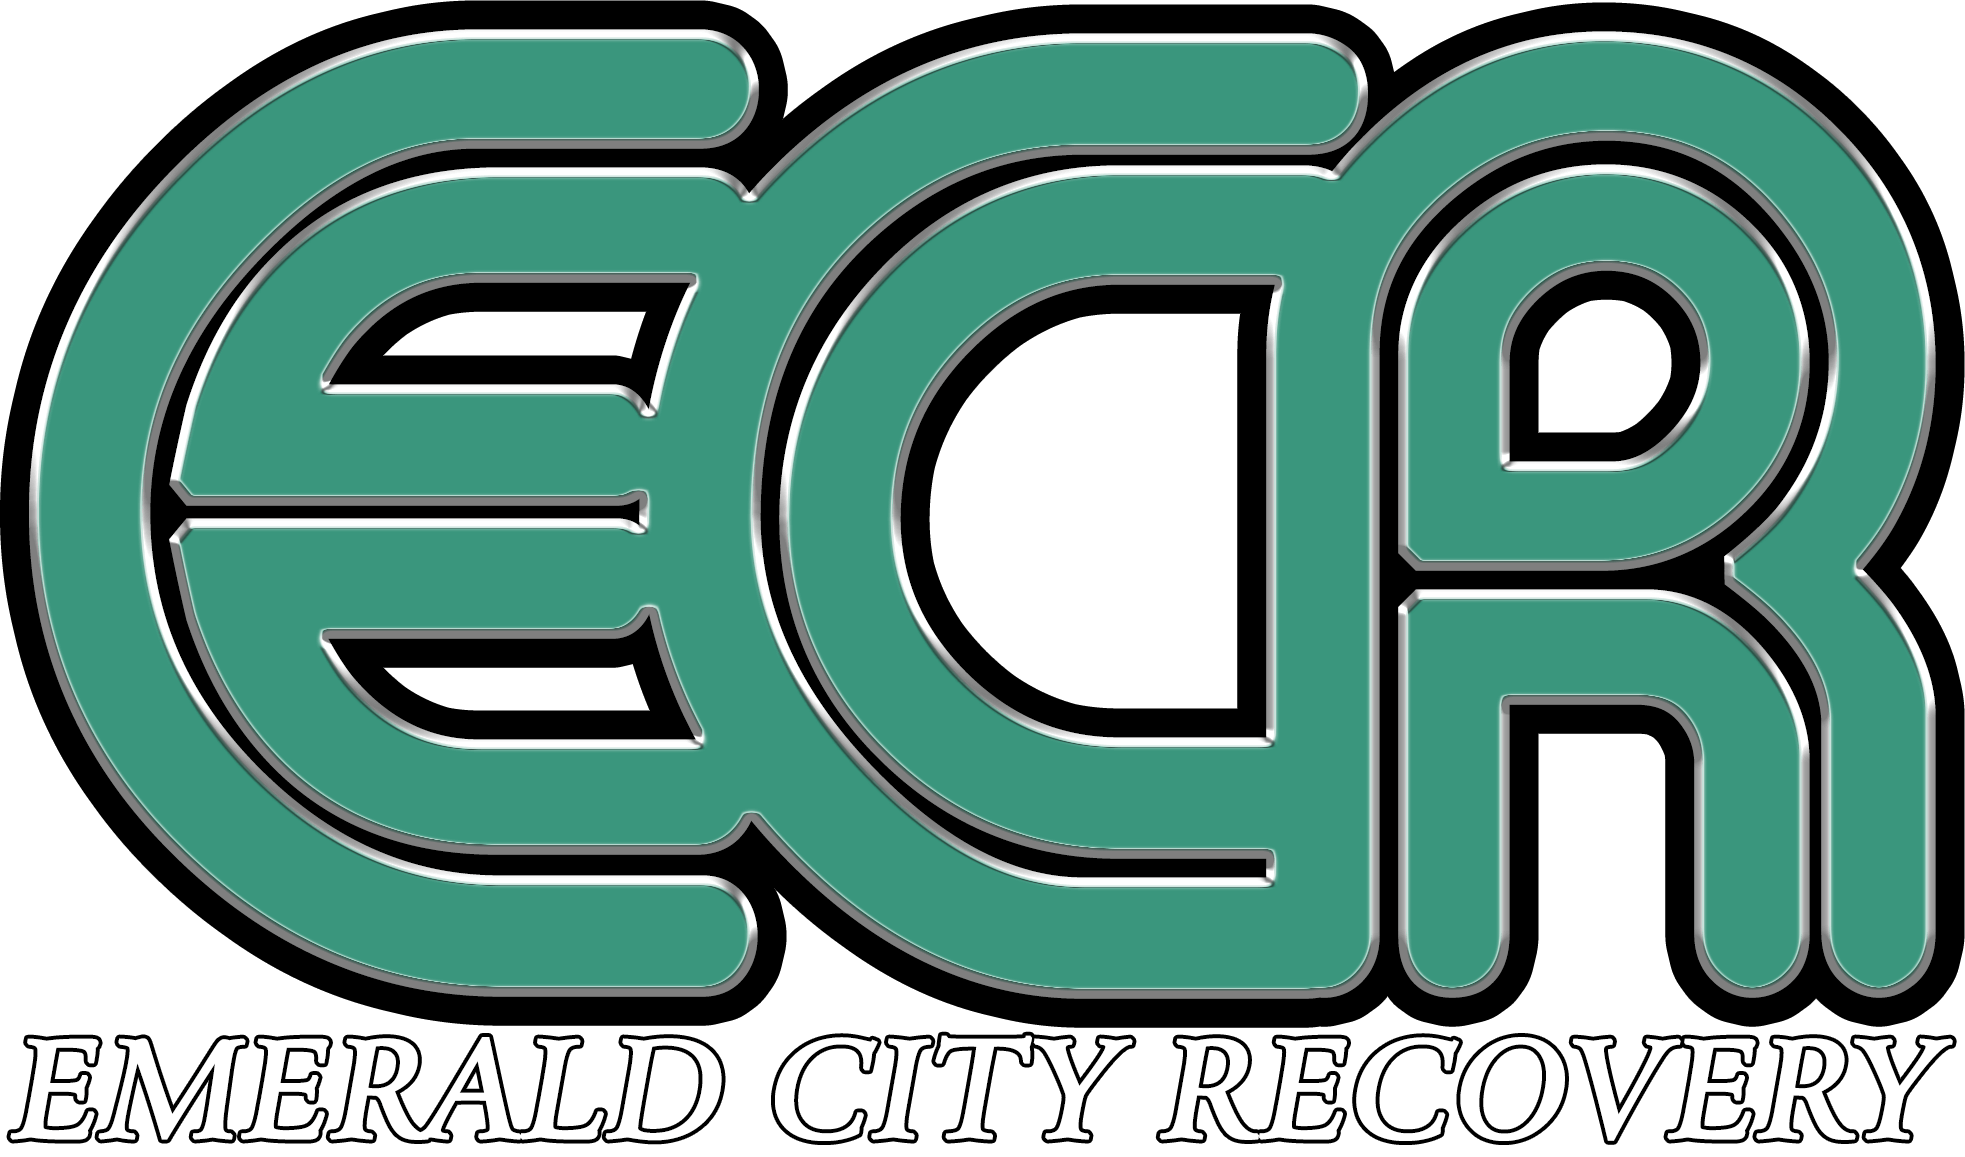 Emerald City Recovery provides professional field visit services in Washington state!